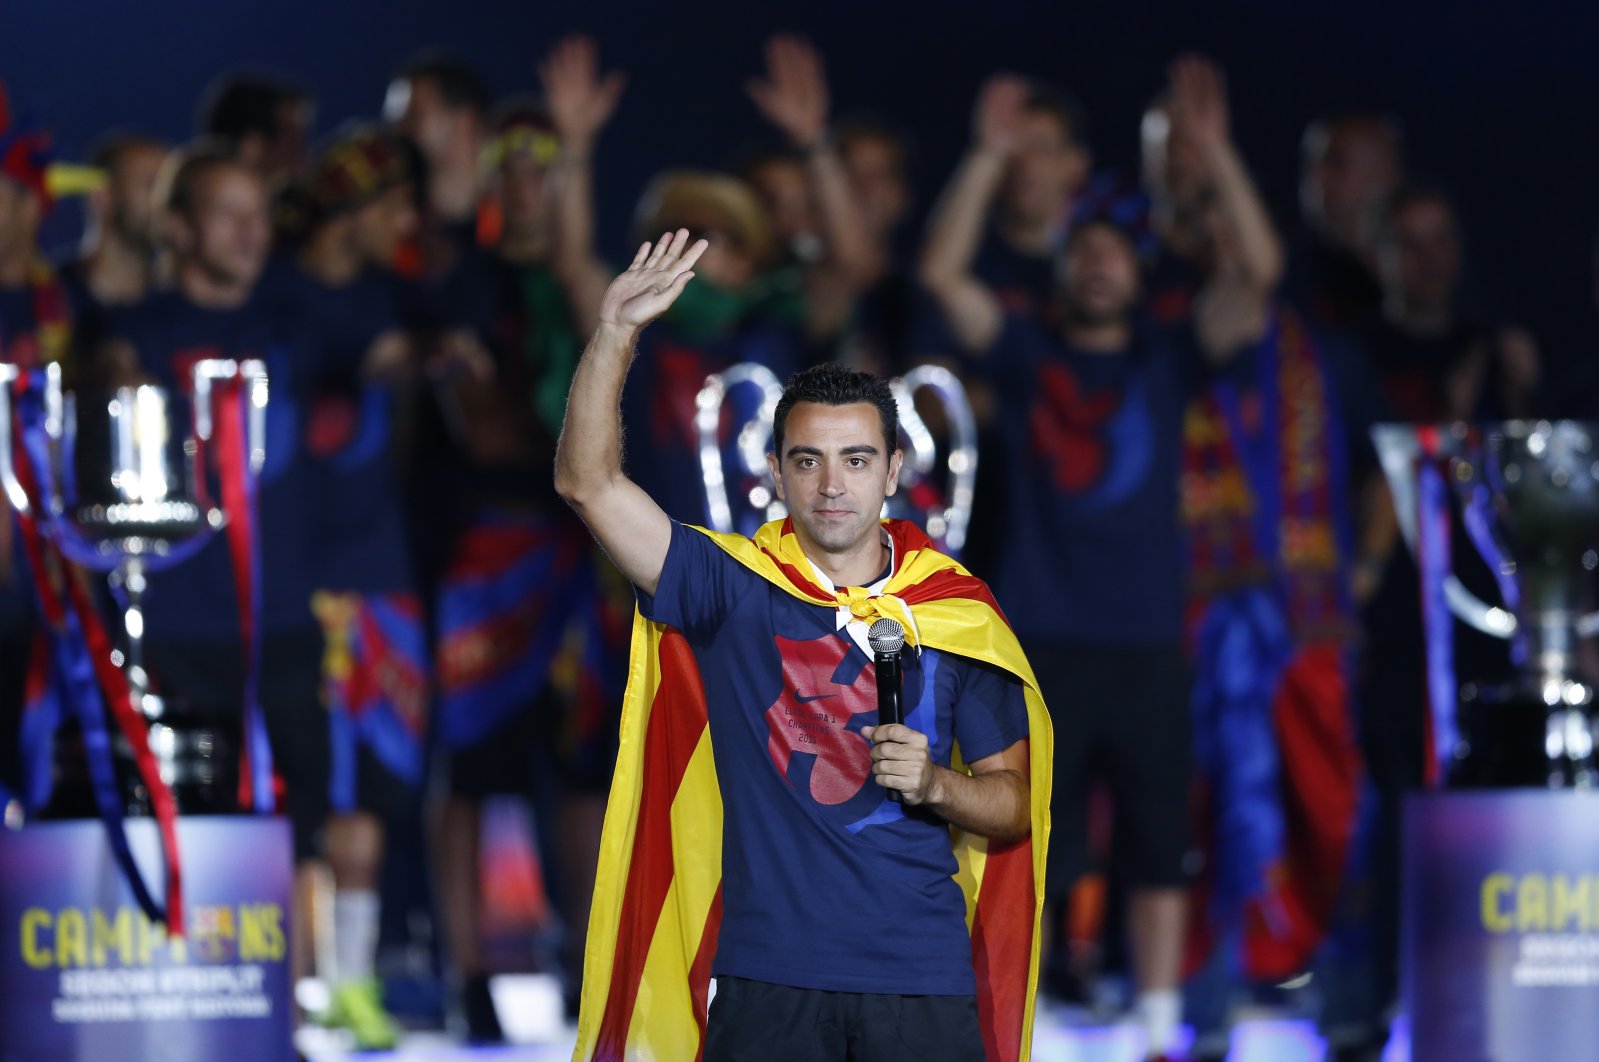 Barcelona's Xavi Hernandez waves to the fans during celebrations at the Camp Nou stadium after winning the Champions League final, Barcelona, Spain, June 7, 2015. (AP File Photo)